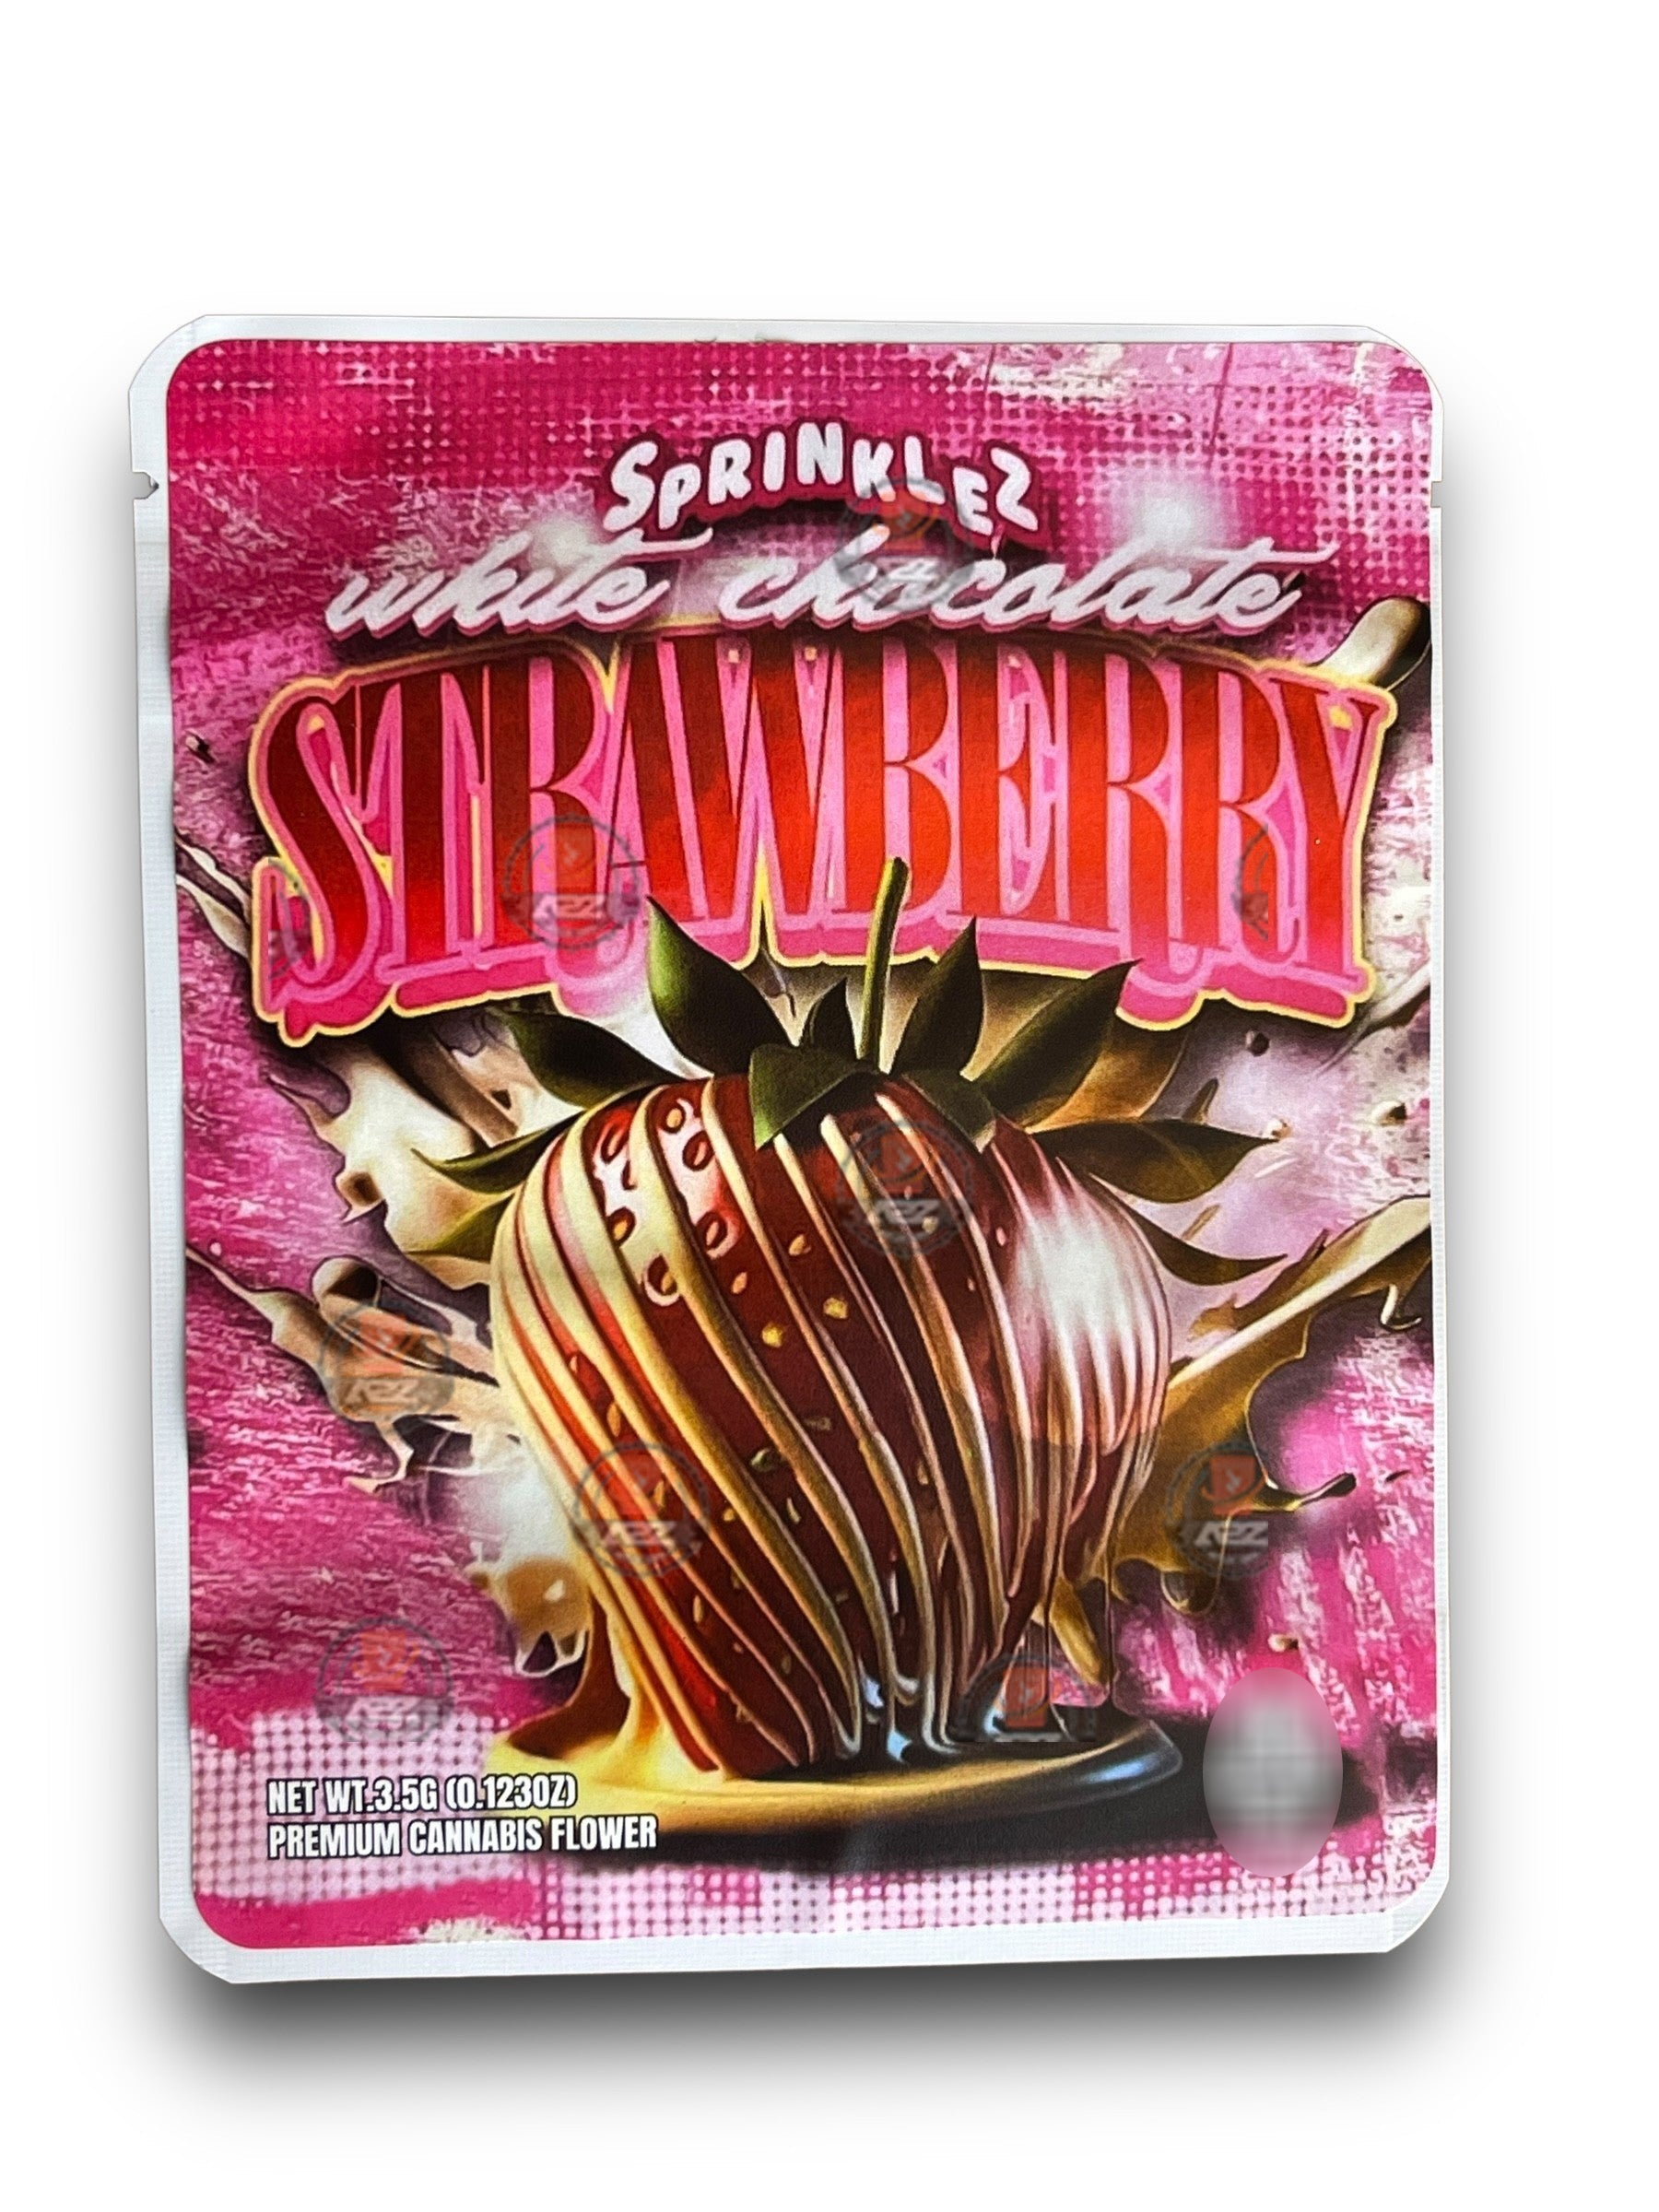 Sprinklez White Chocolate Strawberry 3.5G Mylar Bags -With stickers and label